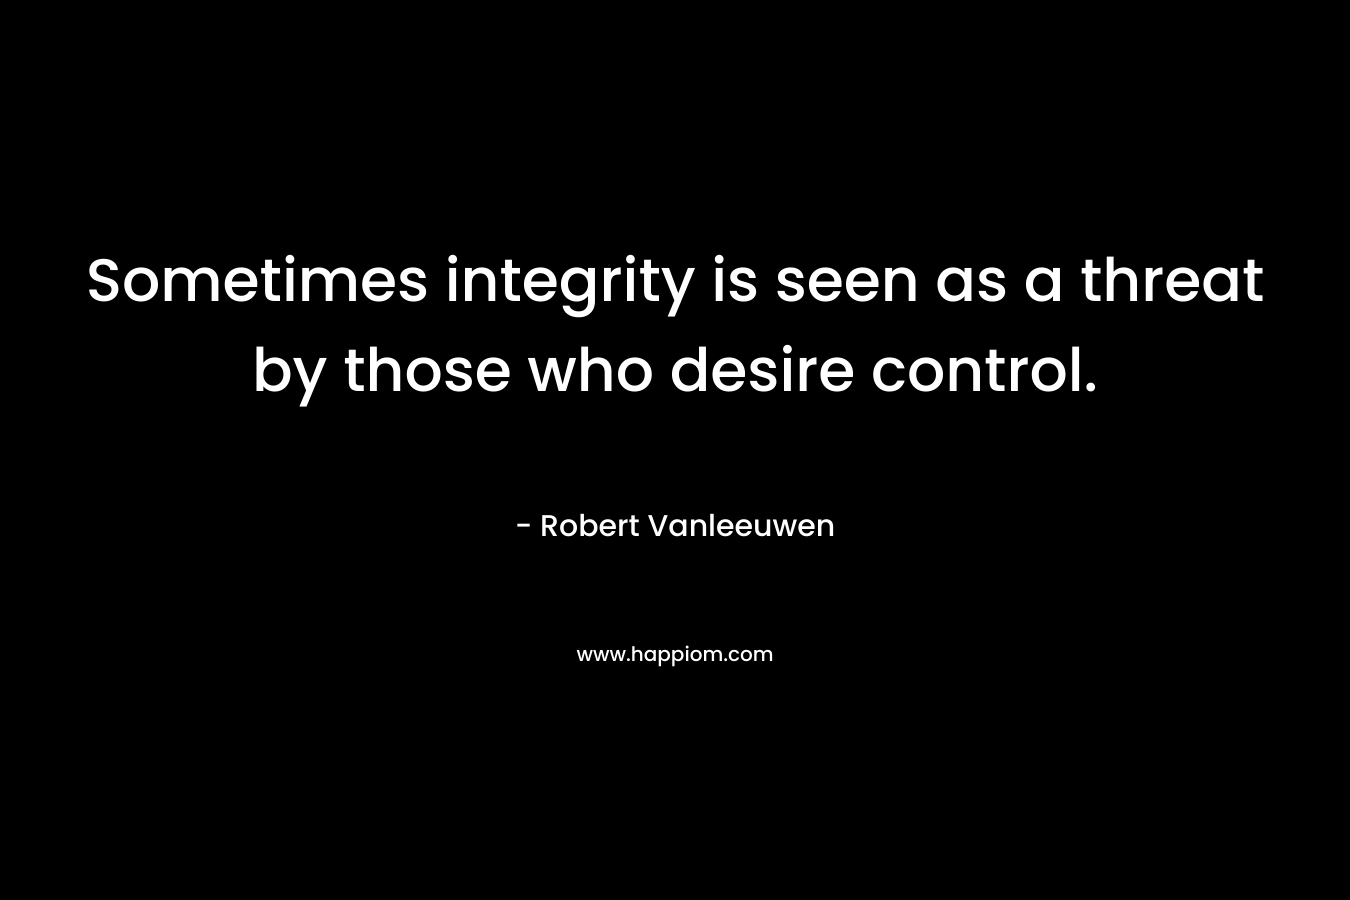 Sometimes integrity is seen as a threat by those who desire control. – Robert Vanleeuwen